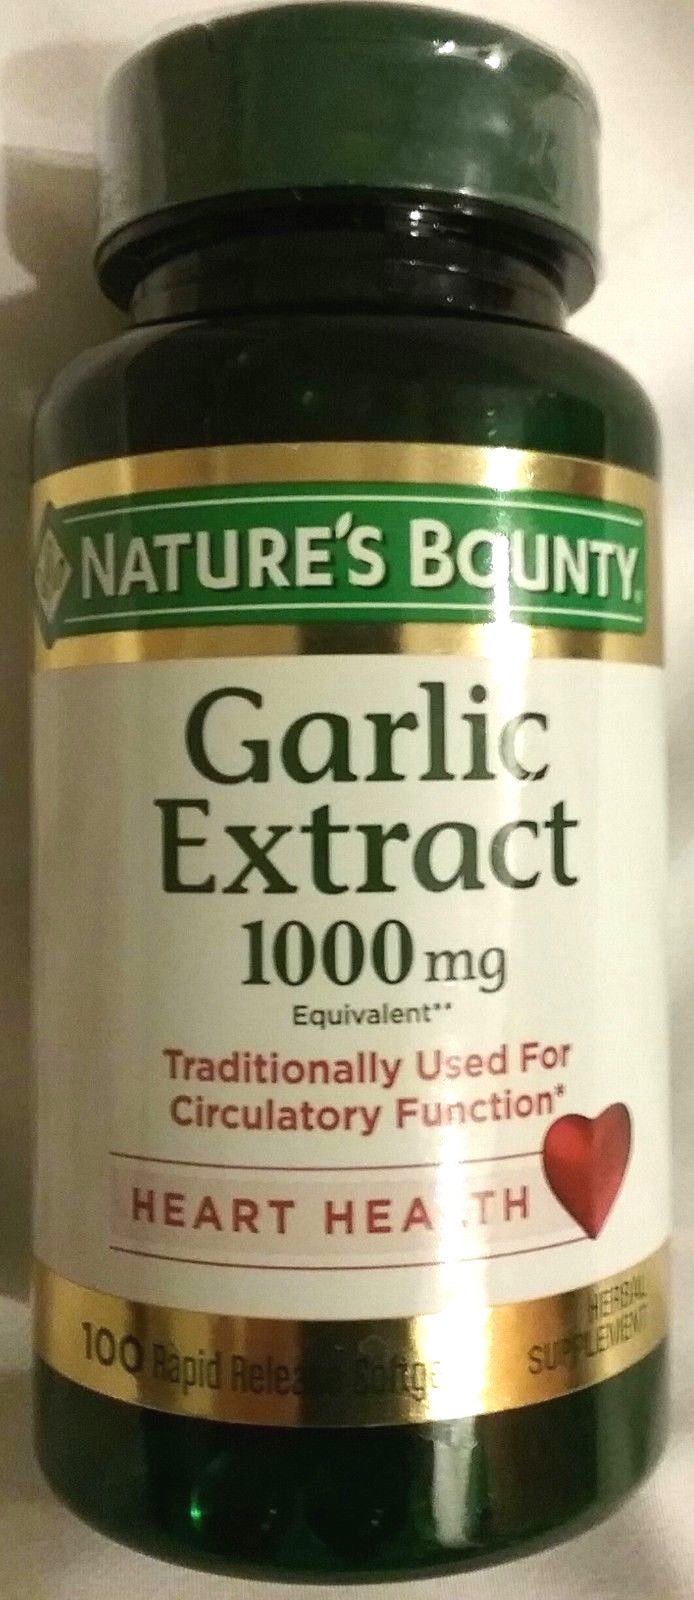 GARLIC EXTRACT Nature's Bounty 1000 mg 100 Rapid Release Softgels Supplement NEW